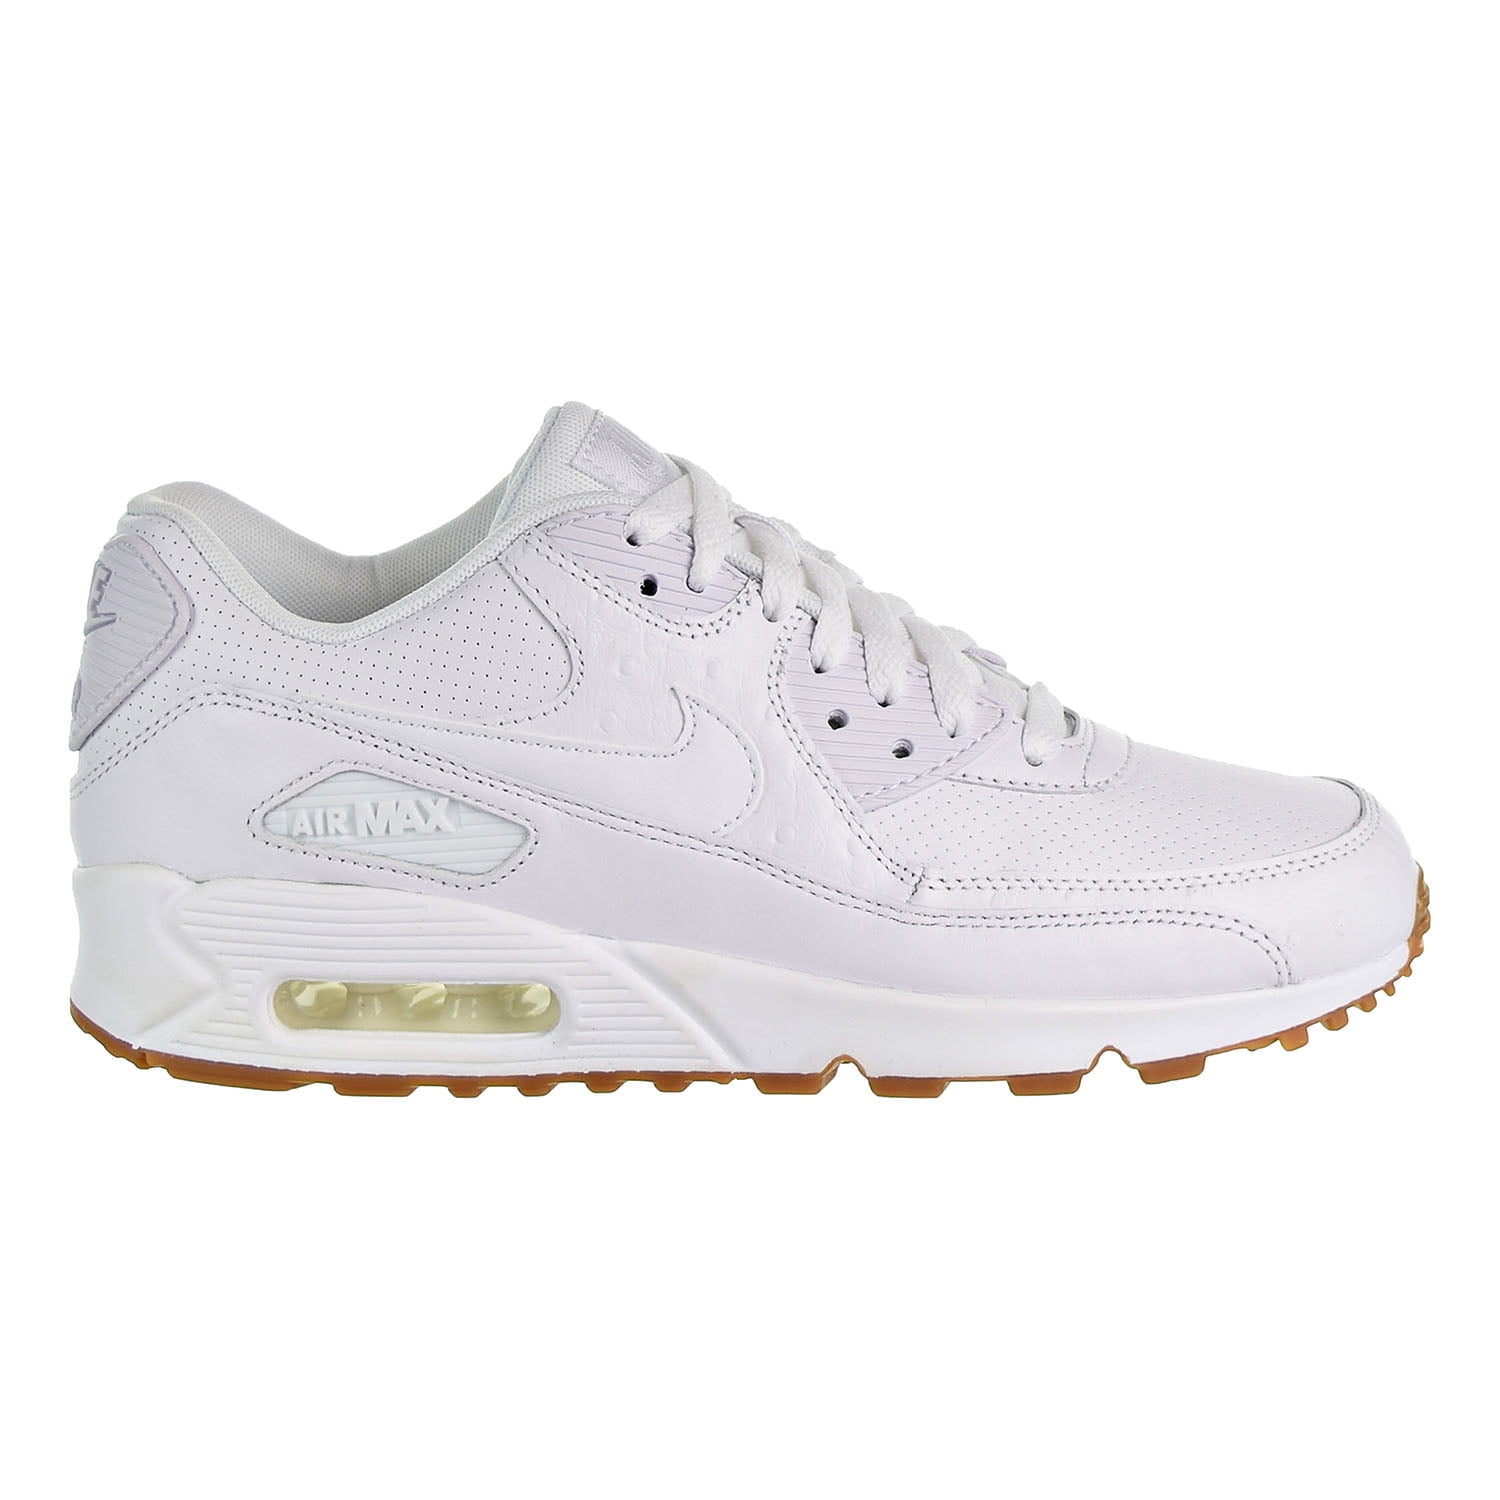 Nike Air Max 90 Leather PA Men's Shoes 